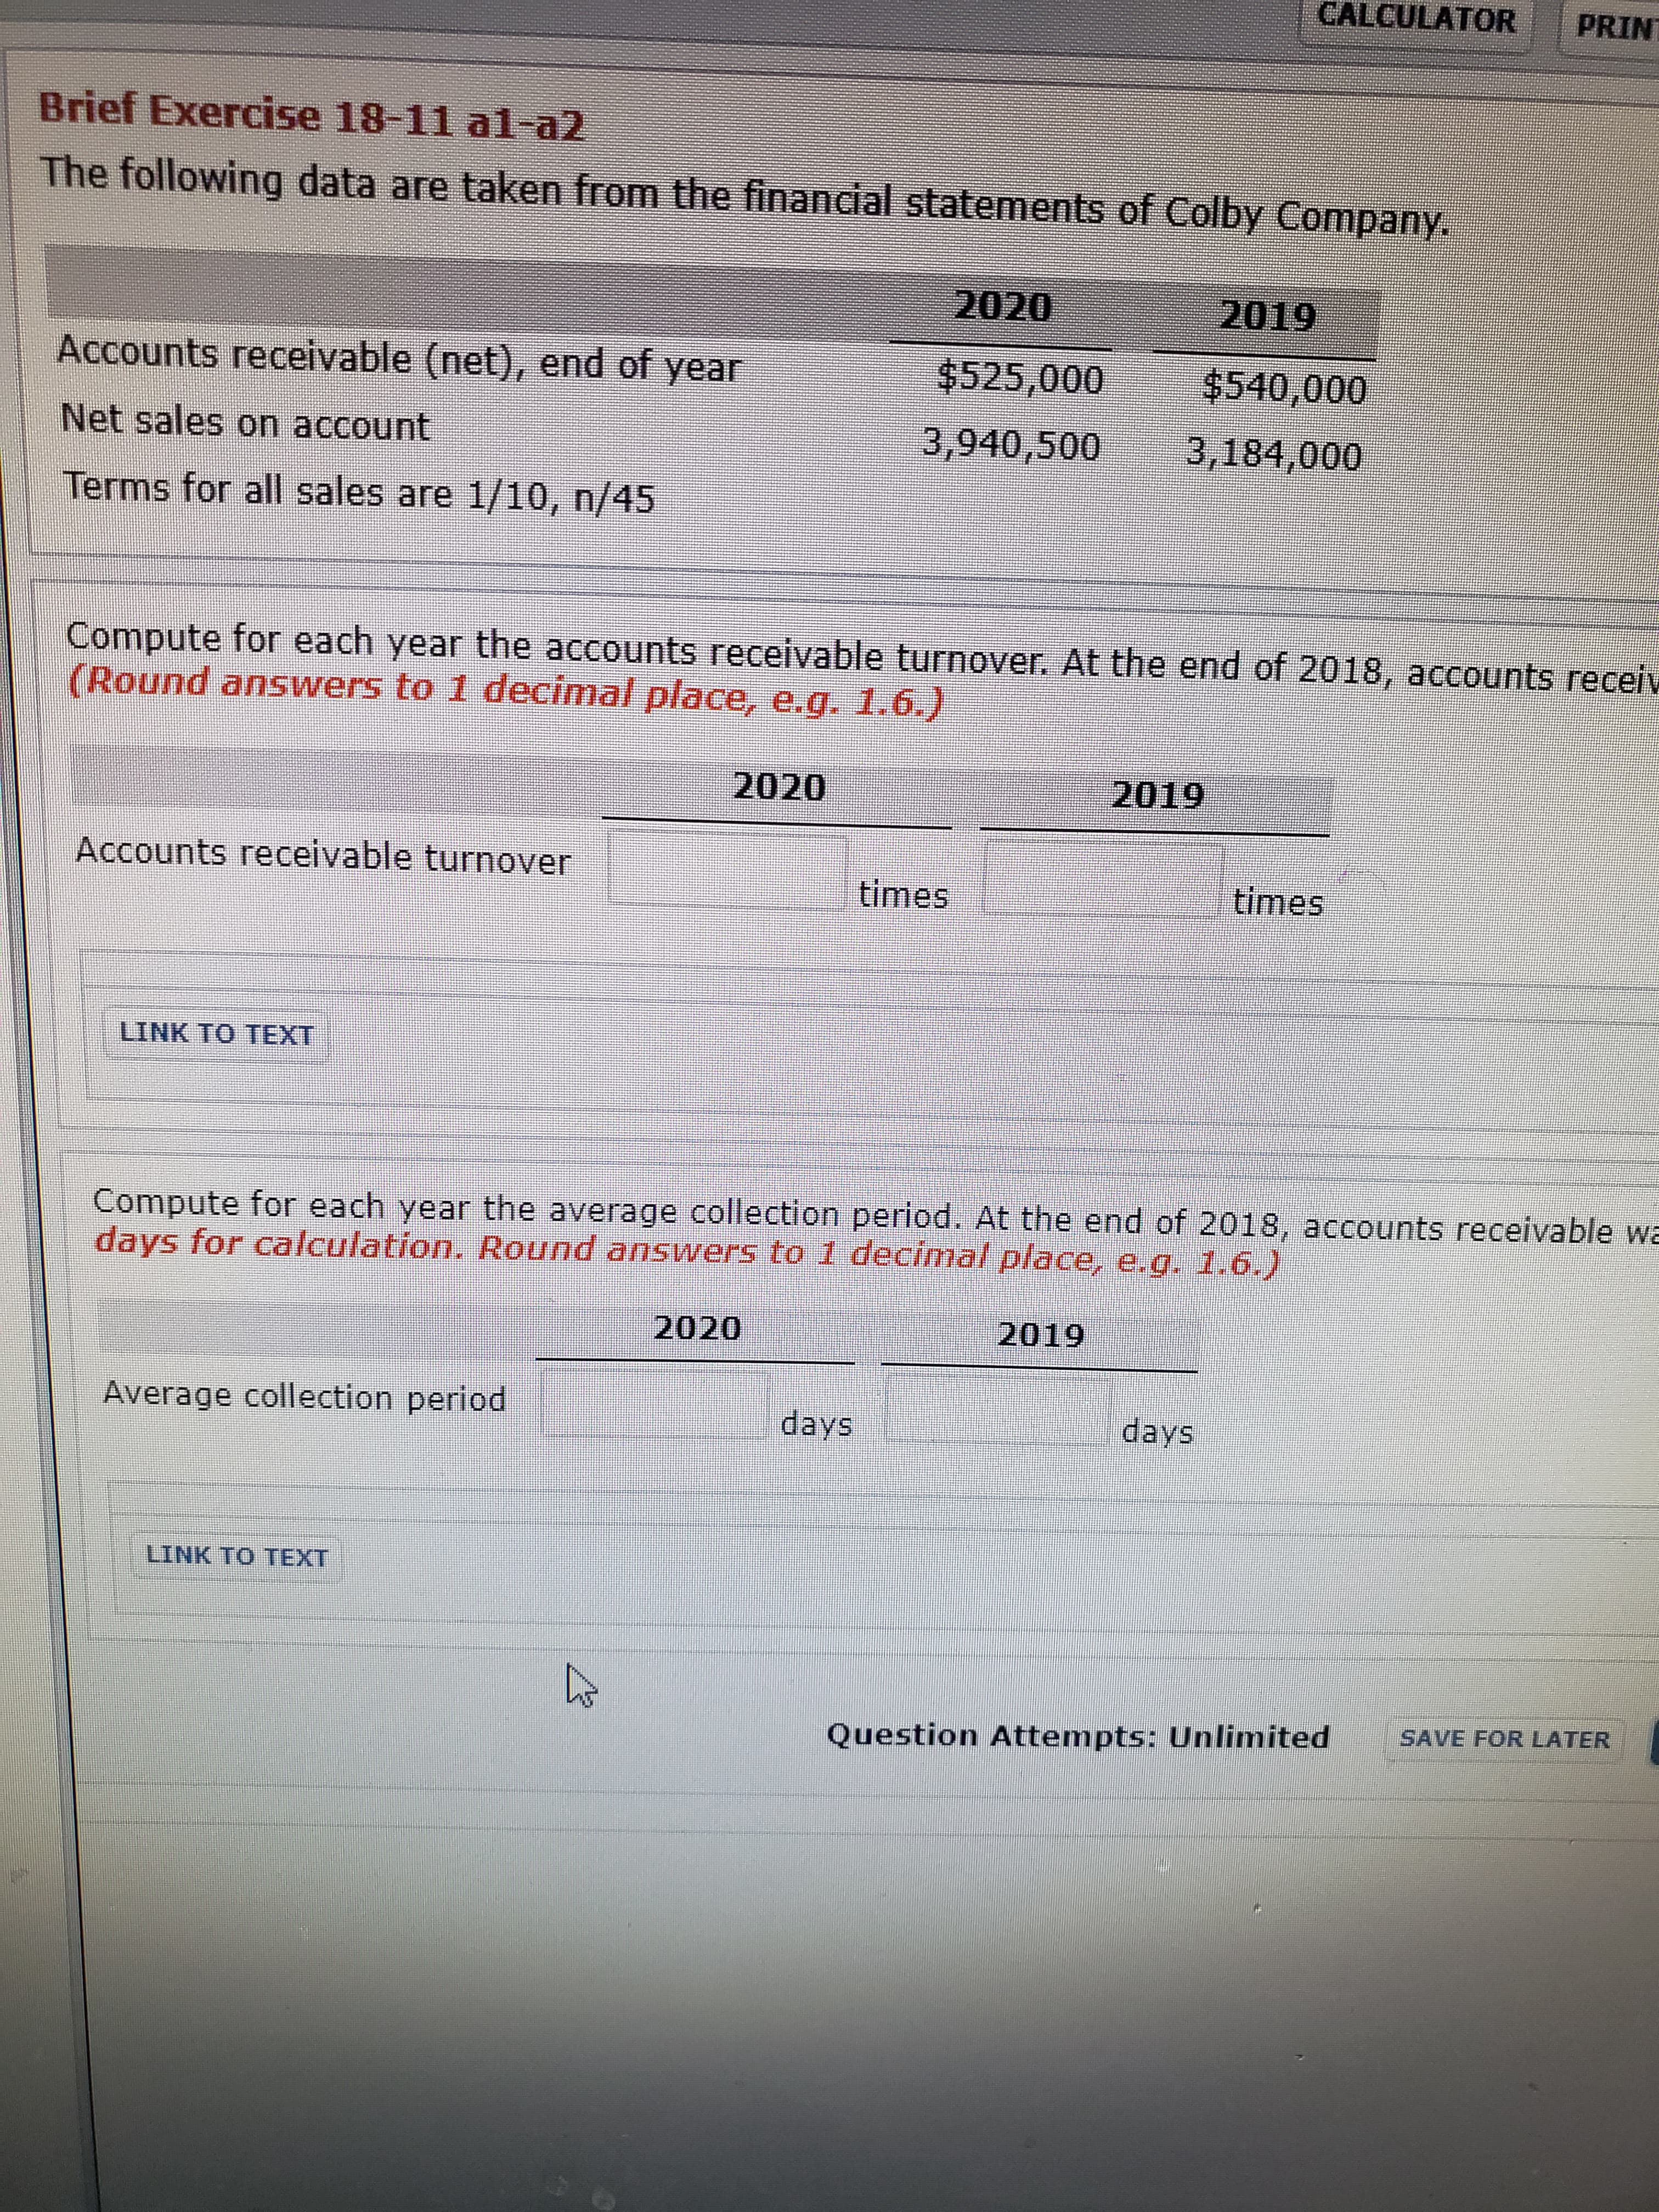 Compute for each year the accounts receivable turnover.
(Raunda
